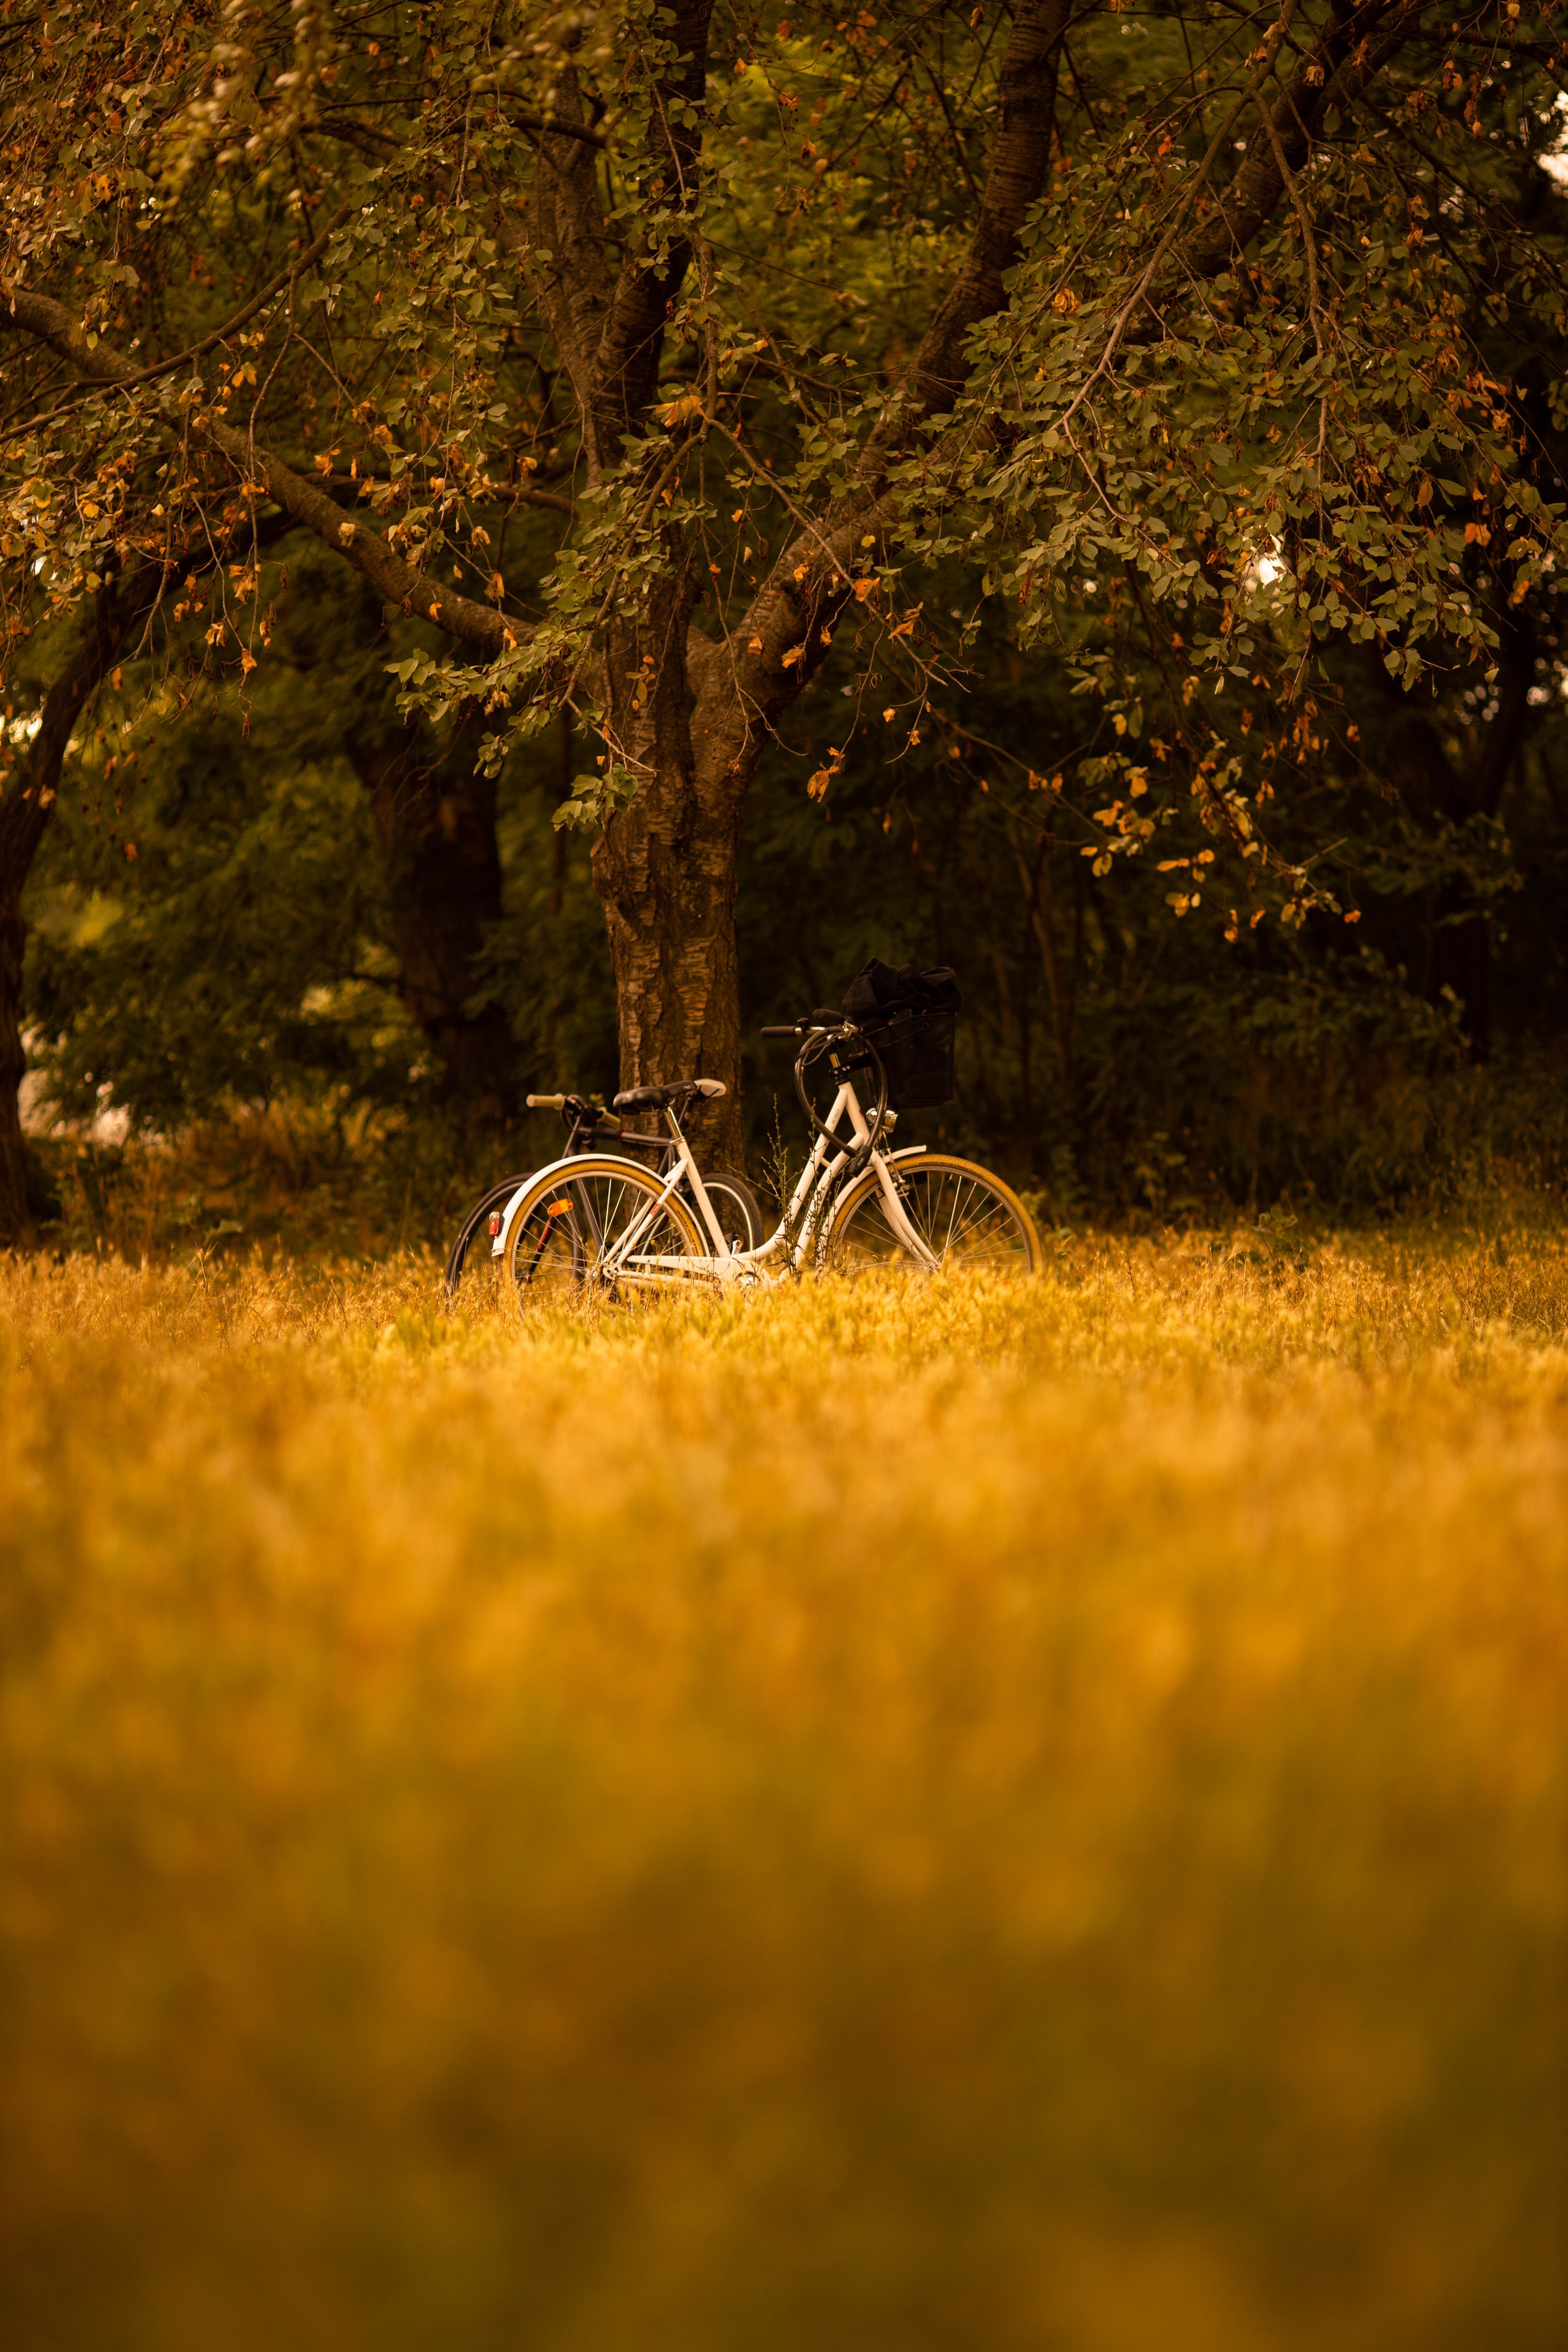 144572 download wallpaper transport, trees, miscellanea, miscellaneous, forest, bicycle screensavers and pictures for free